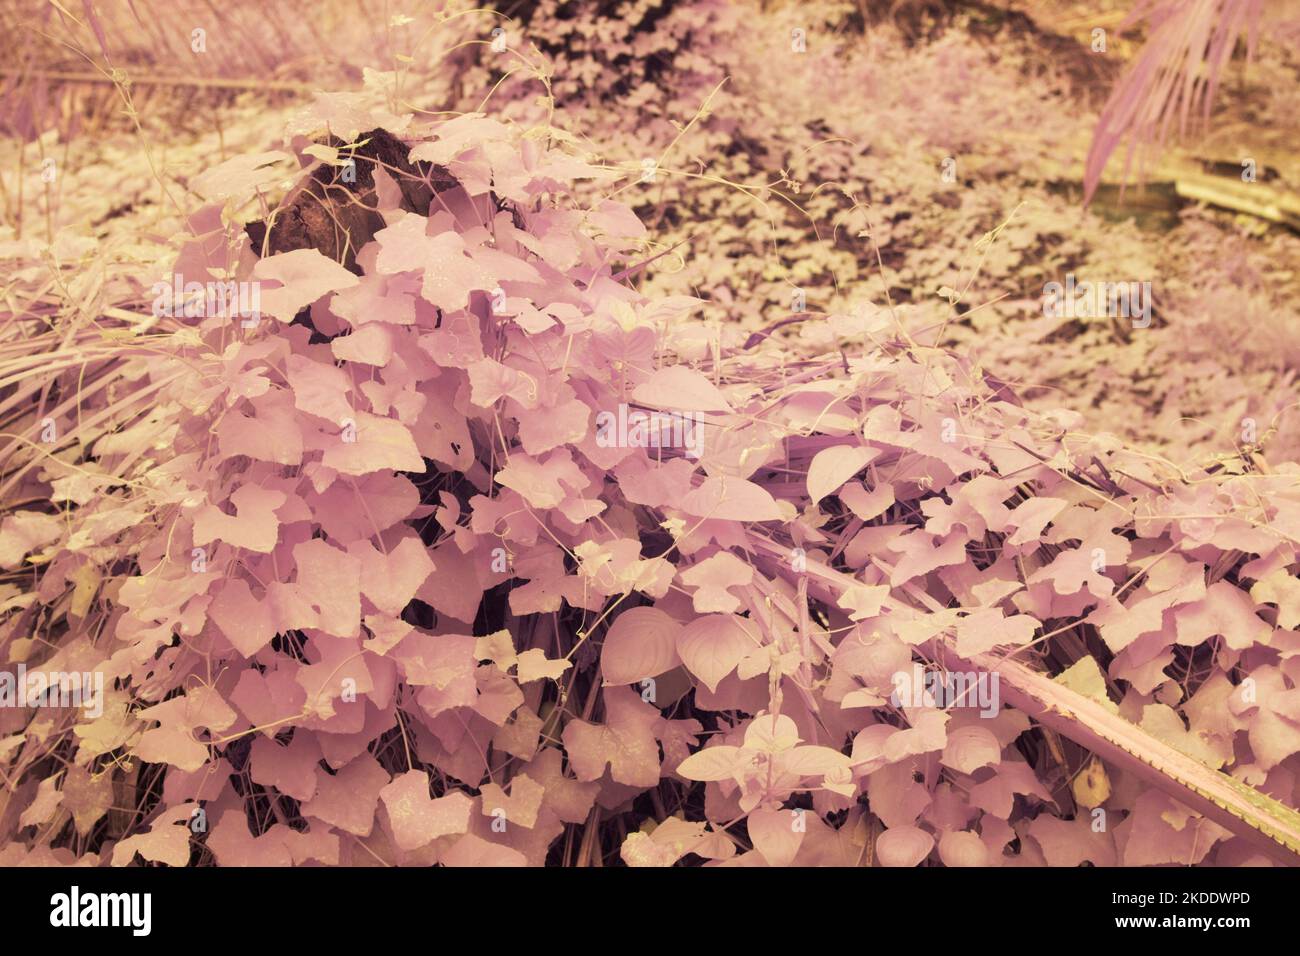 infrared image of the varieties of wild foliage at the farm. Stock Photo